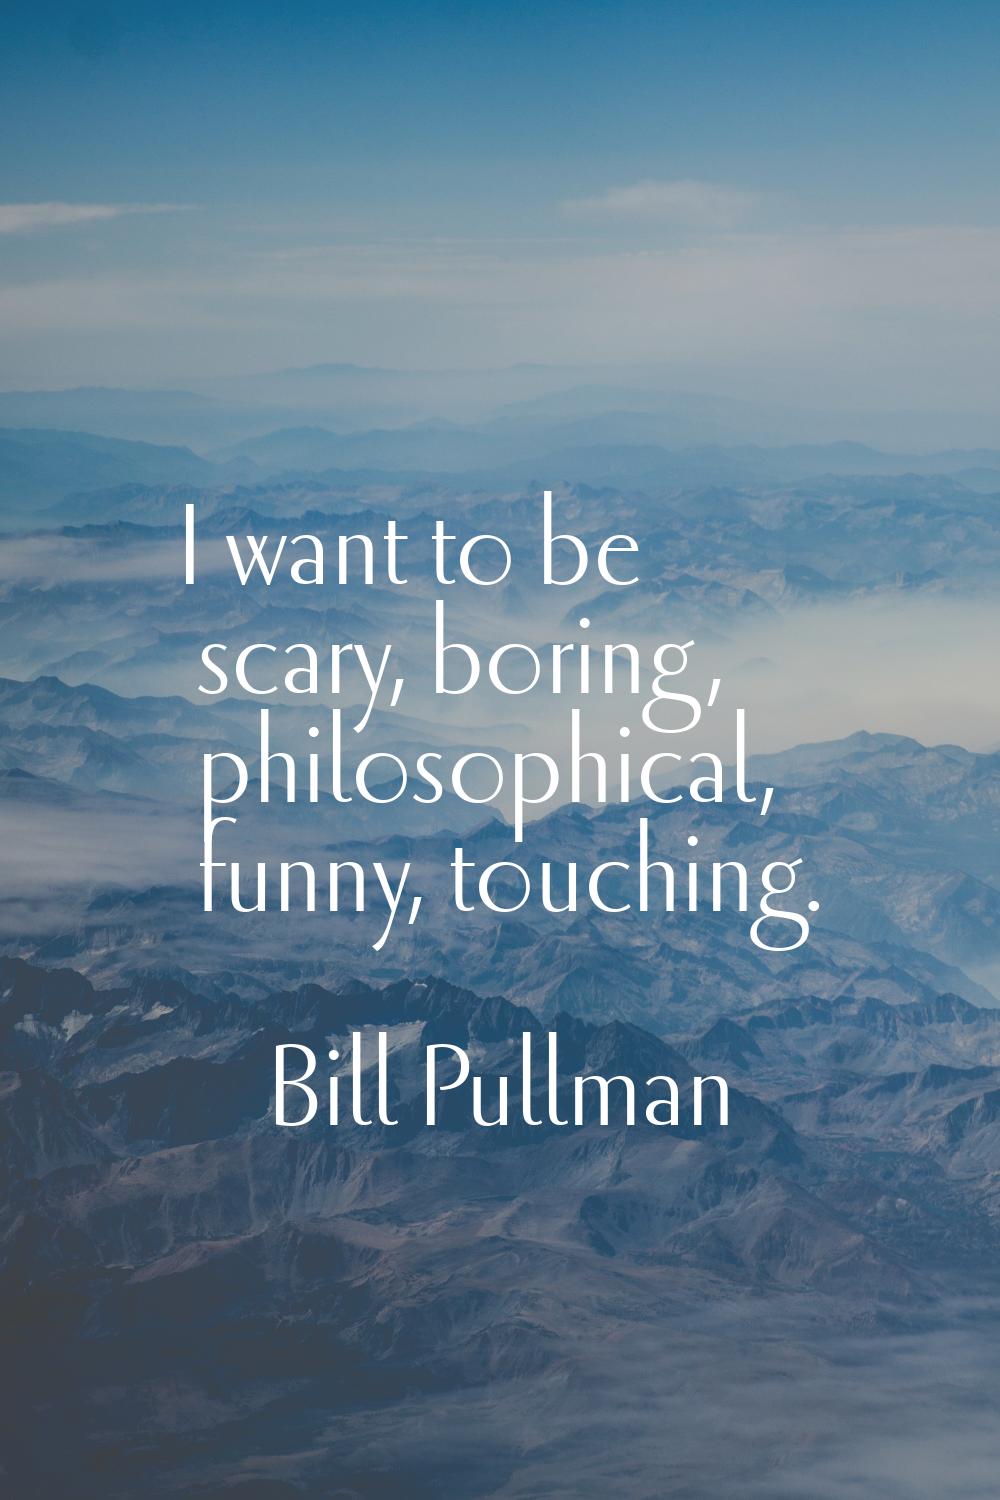 I want to be scary, boring, philosophical, funny, touching.